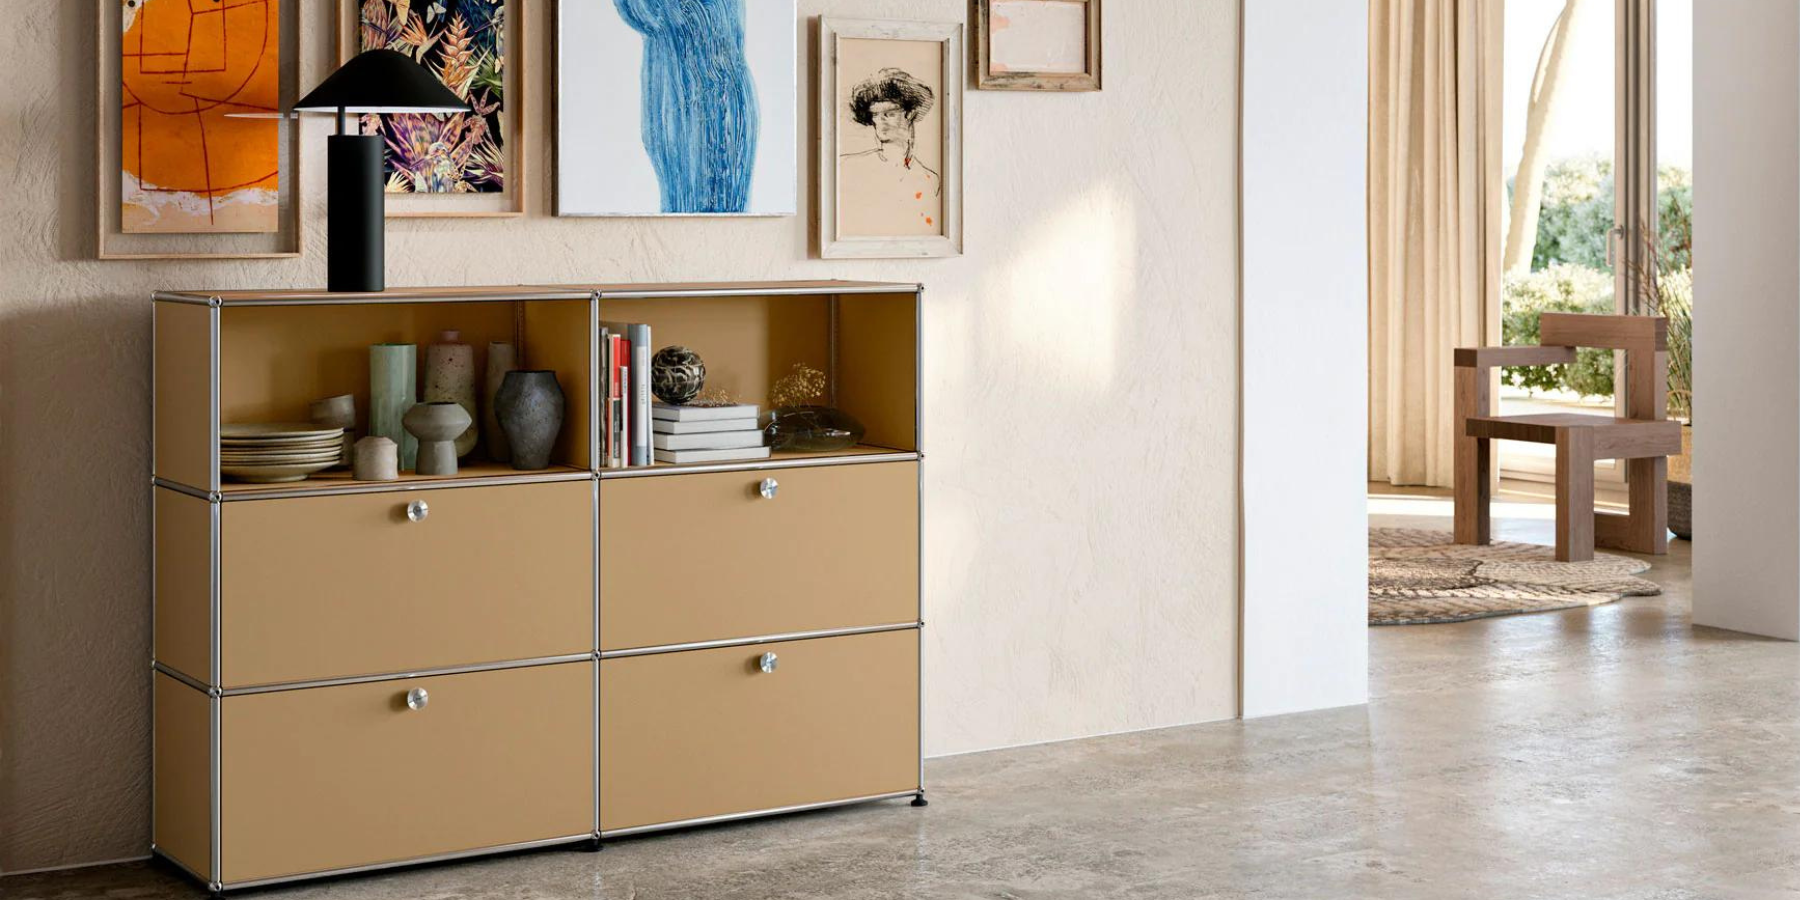 Stylish and Functional Storage Furniture: Sideboards & dressers, TV stands, and cabinets from ONE52 Furniture.